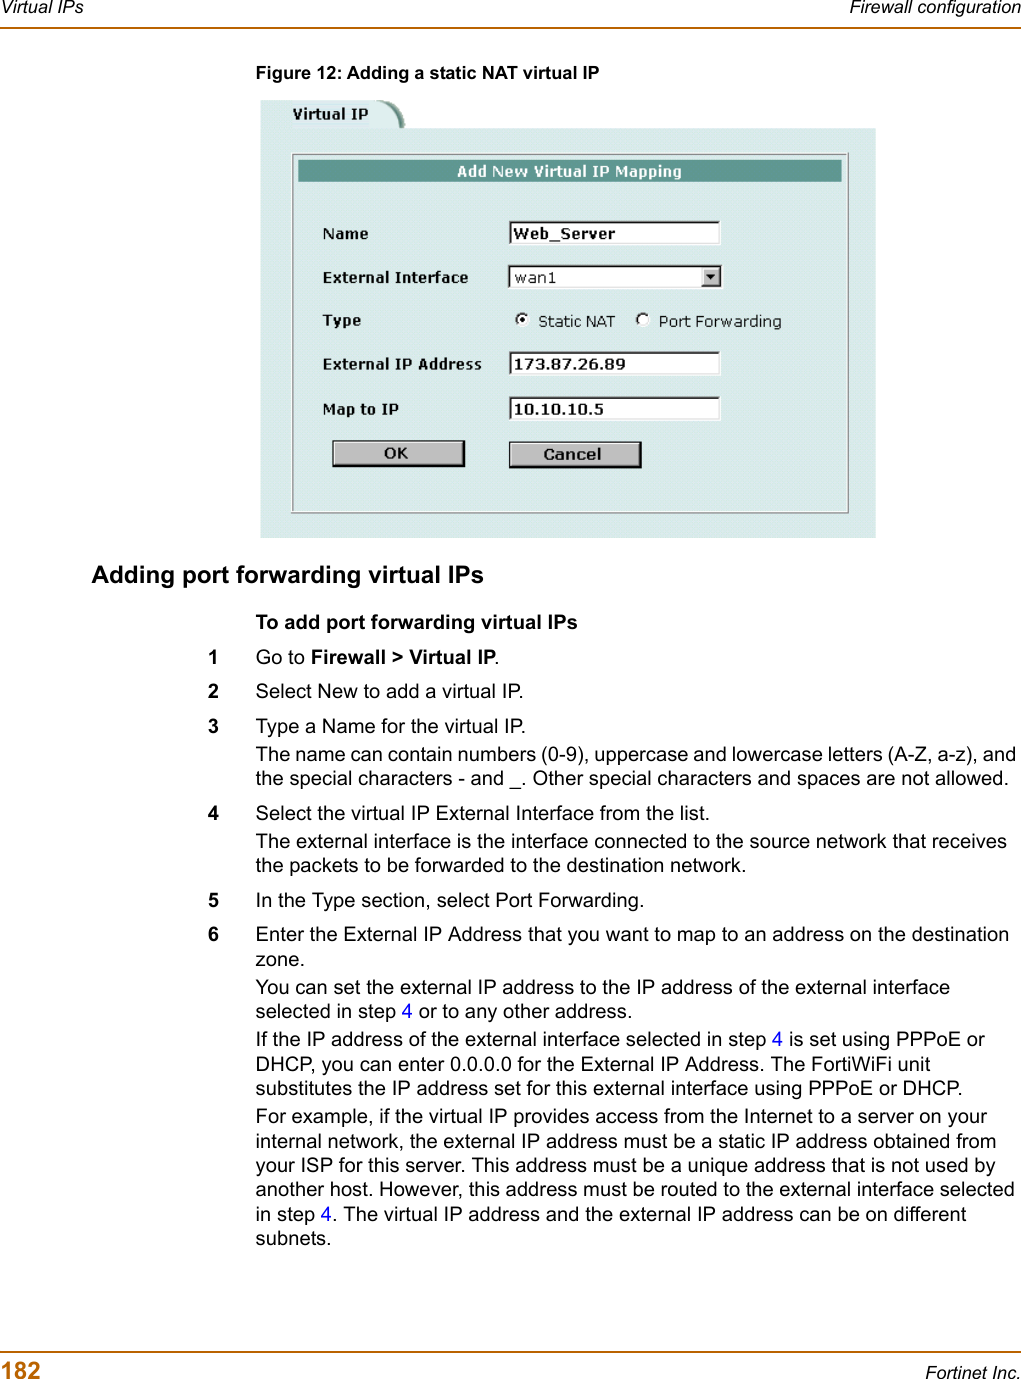 182 Fortinet Inc.Virtual IPs Firewall configurationFigure 12: Adding a static NAT virtual IPAdding port forwarding virtual IPsTo add port forwarding virtual IPs1Go to Firewall &gt; Virtual IP.2Select New to add a virtual IP.3Type a Name for the virtual IP.The name can contain numbers (0-9), uppercase and lowercase letters (A-Z, a-z), and the special characters - and _. Other special characters and spaces are not allowed.4Select the virtual IP External Interface from the list. The external interface is the interface connected to the source network that receives the packets to be forwarded to the destination network.5In the Type section, select Port Forwarding.6Enter the External IP Address that you want to map to an address on the destination zone.You can set the external IP address to the IP address of the external interface selected in step 4 or to any other address.If the IP address of the external interface selected in step 4 is set using PPPoE or DHCP, you can enter 0.0.0.0 for the External IP Address. The FortiWiFi unit substitutes the IP address set for this external interface using PPPoE or DHCP.For example, if the virtual IP provides access from the Internet to a server on your internal network, the external IP address must be a static IP address obtained from your ISP for this server. This address must be a unique address that is not used by another host. However, this address must be routed to the external interface selected in step 4. The virtual IP address and the external IP address can be on different subnets. 